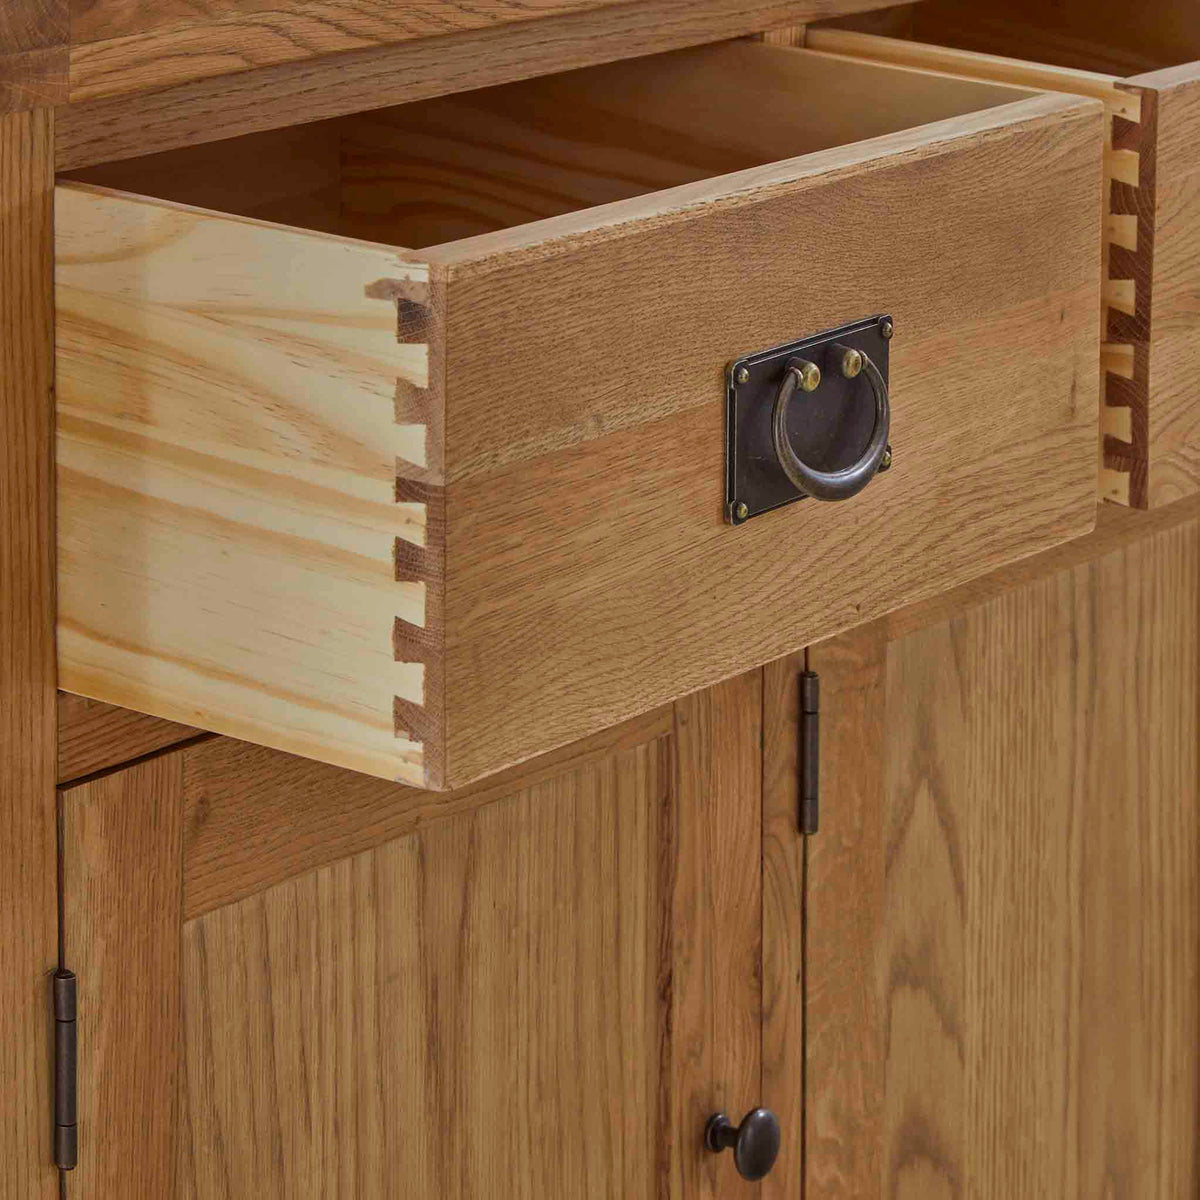 Zelah Oak Extra Large Sideboard - Showing dovetail joints on drawers